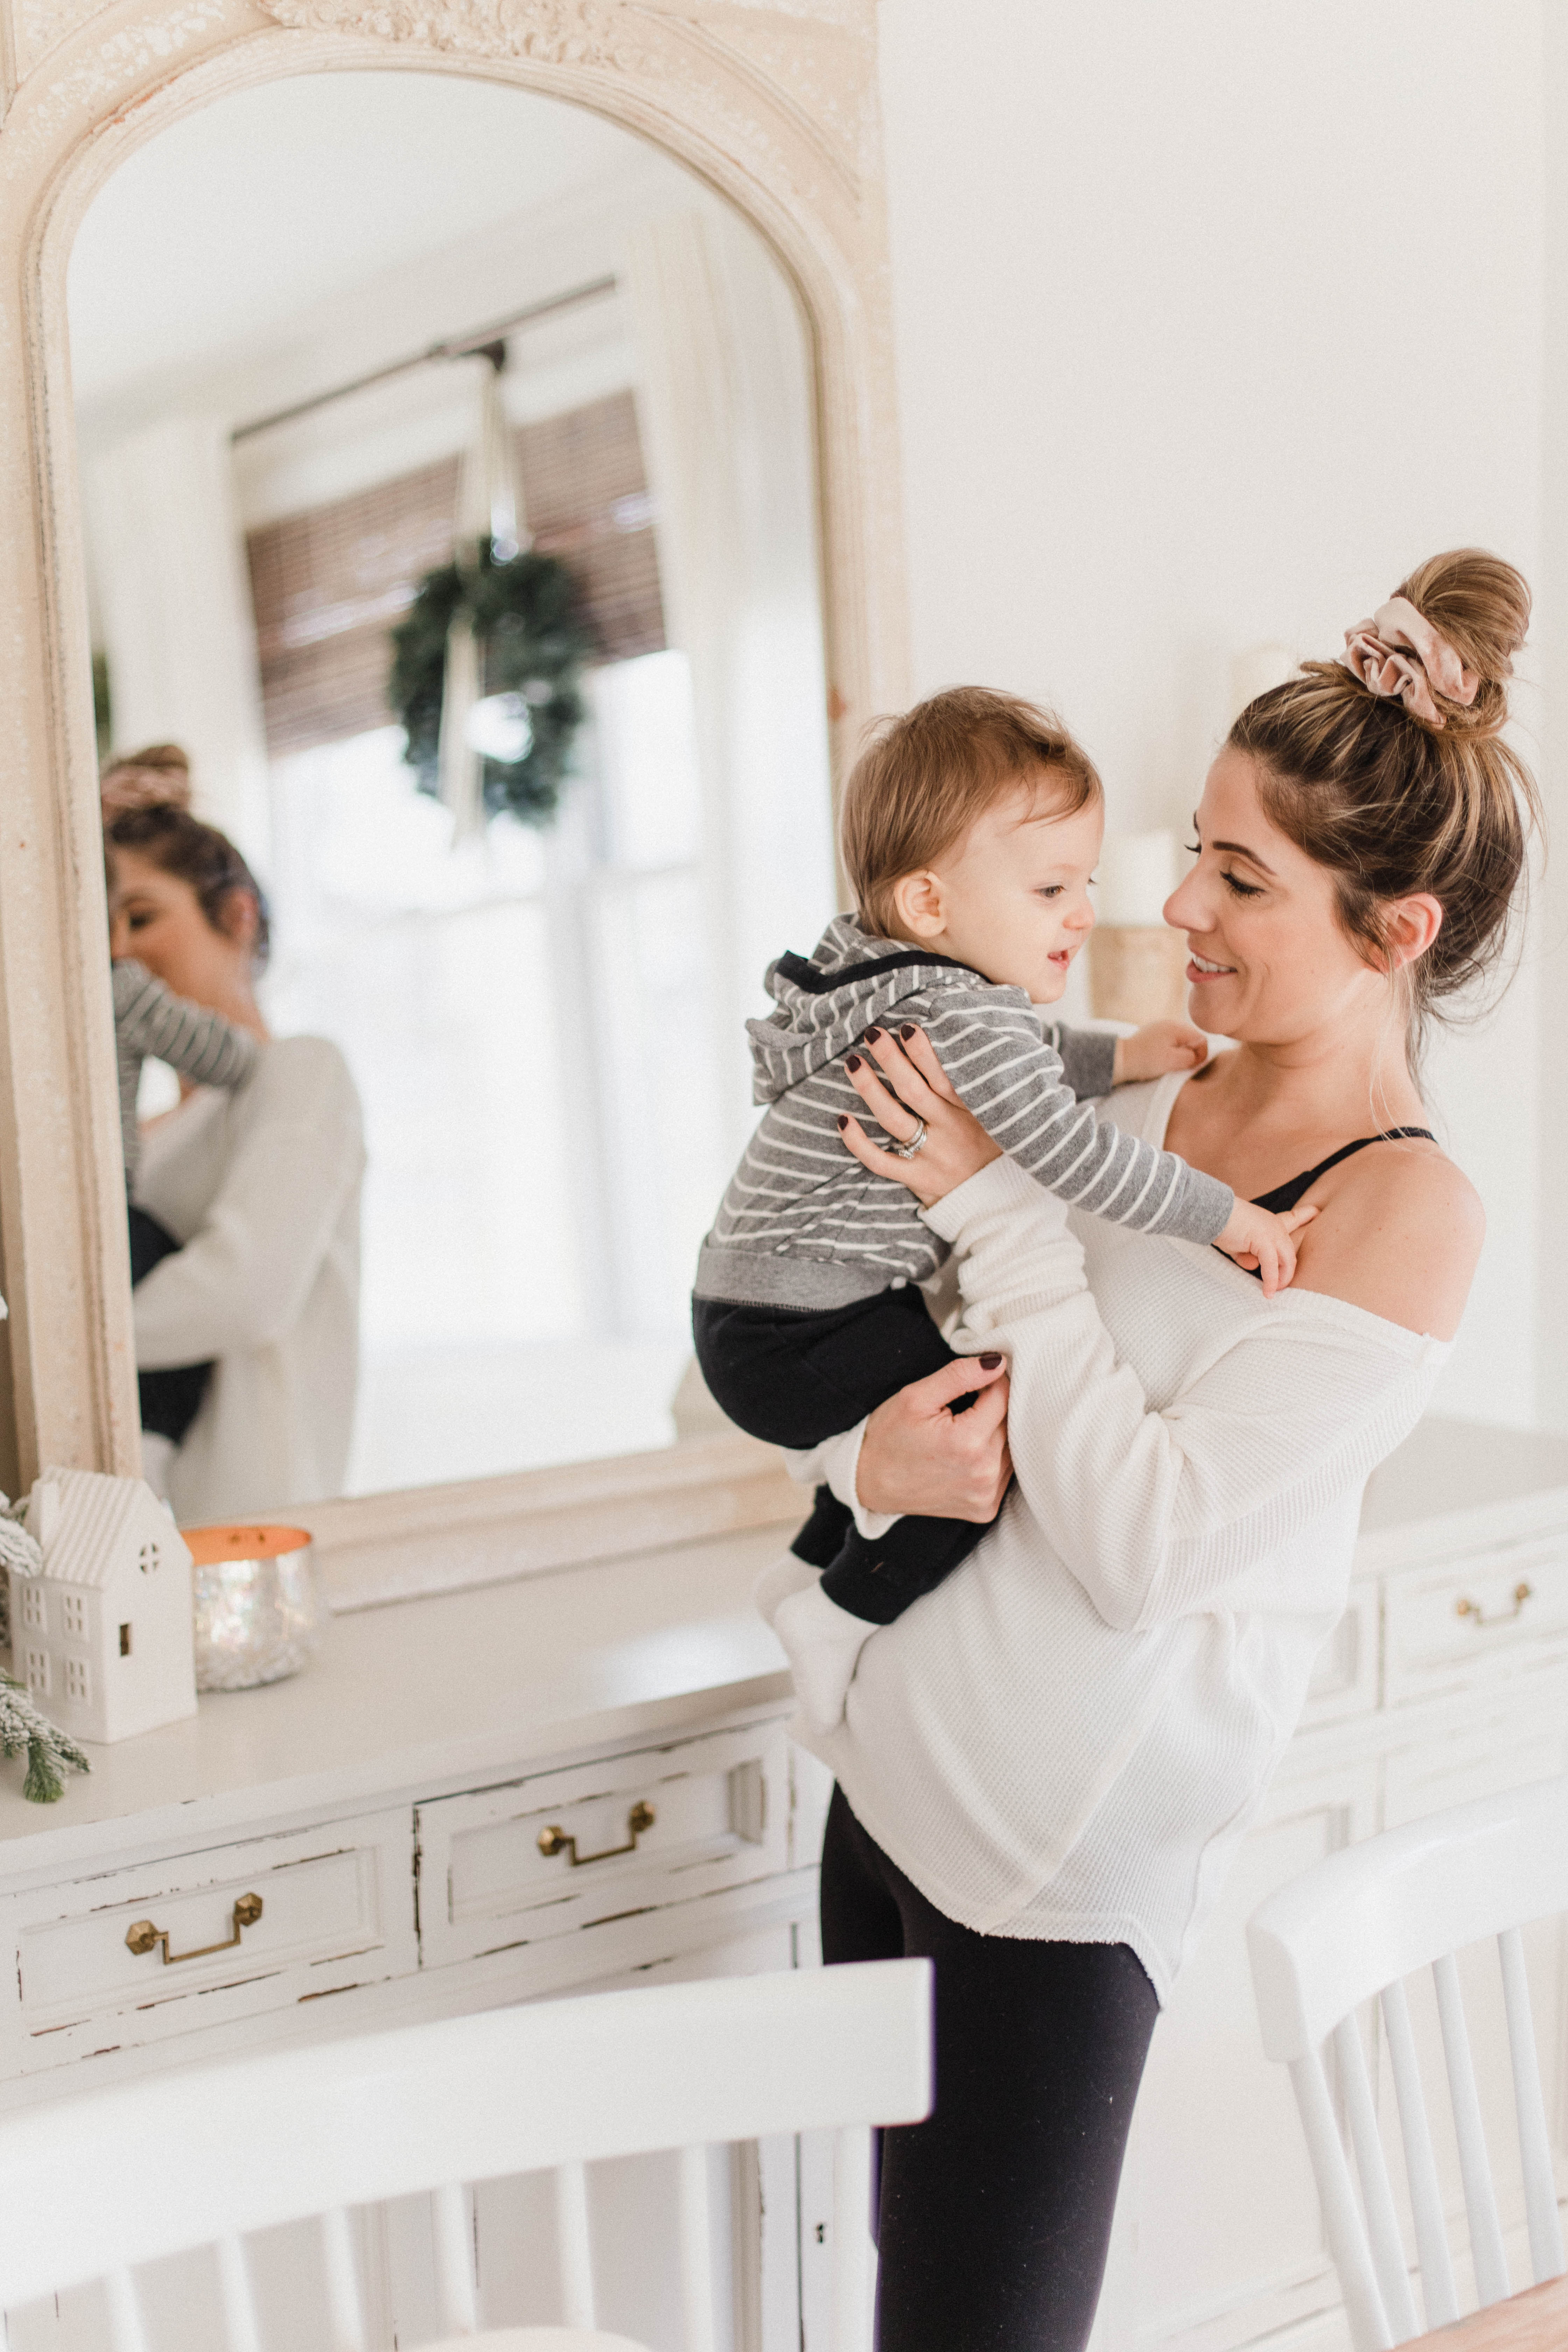 Connecticut life and style blogger Lauren McBride shares her health goals for 2019 and a vitamin and probiotic supplement that's non-GMO, organic, and formulated with fermented probiotics and whole foods. 